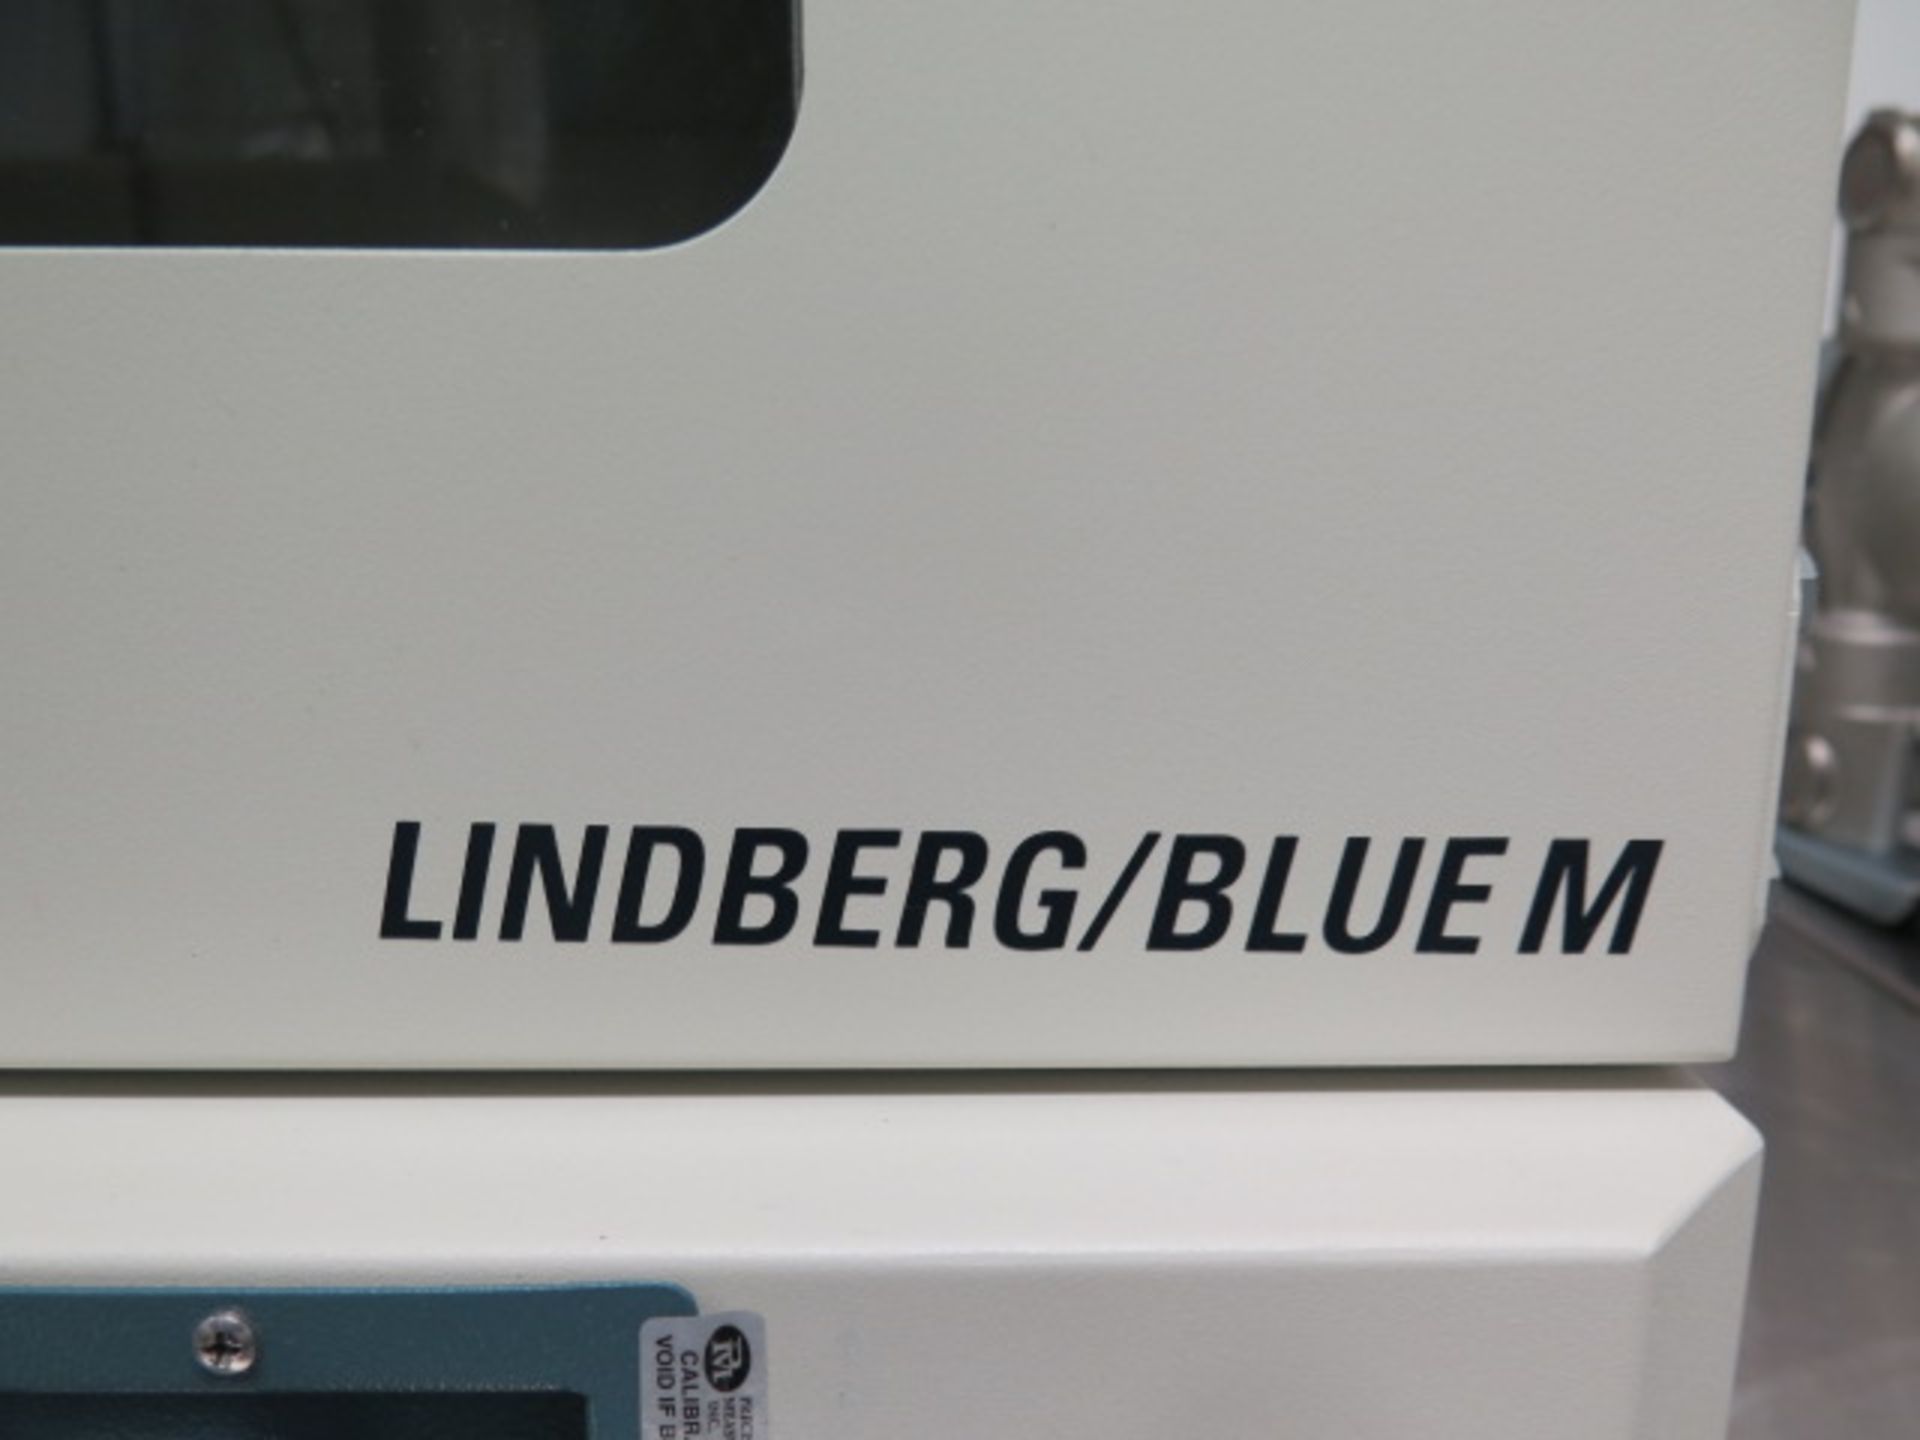 Thermo Electron Lindberg / BlueM mdl. V01218A Vacuum Oven s/n 9100734 (SOLD AS-IS - NO WARRANTY) - Image 8 of 10